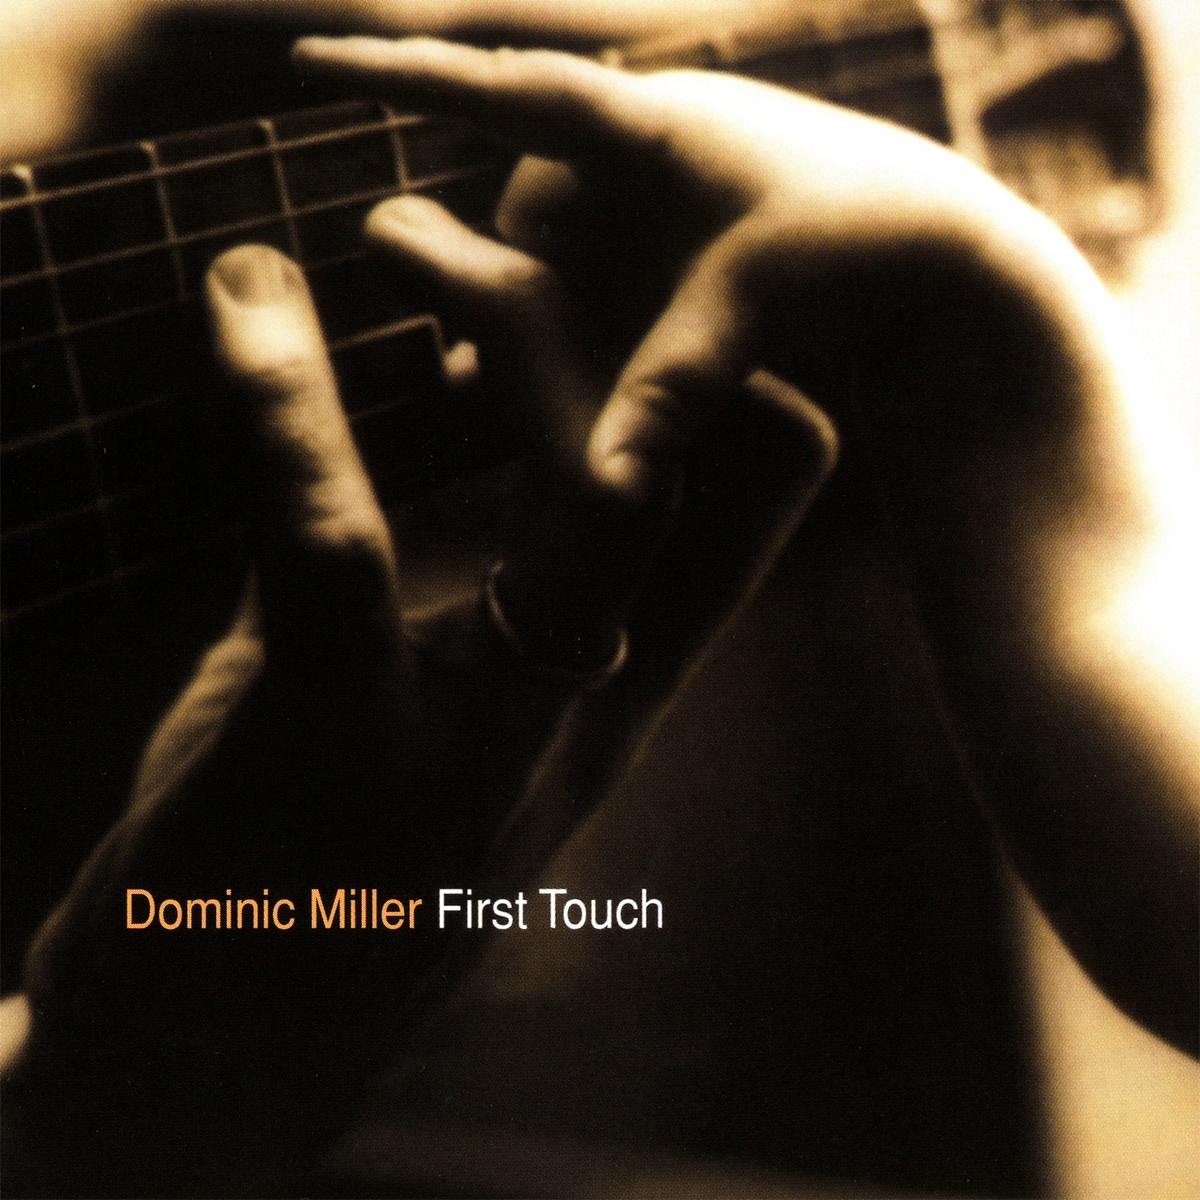 La la touch. Dominic Miller. Dominic Miller 'first Touch, LP. Dominic Miller - Shapes (2004). Dominic Miller & Neil Stacey - New Dawn 2002.